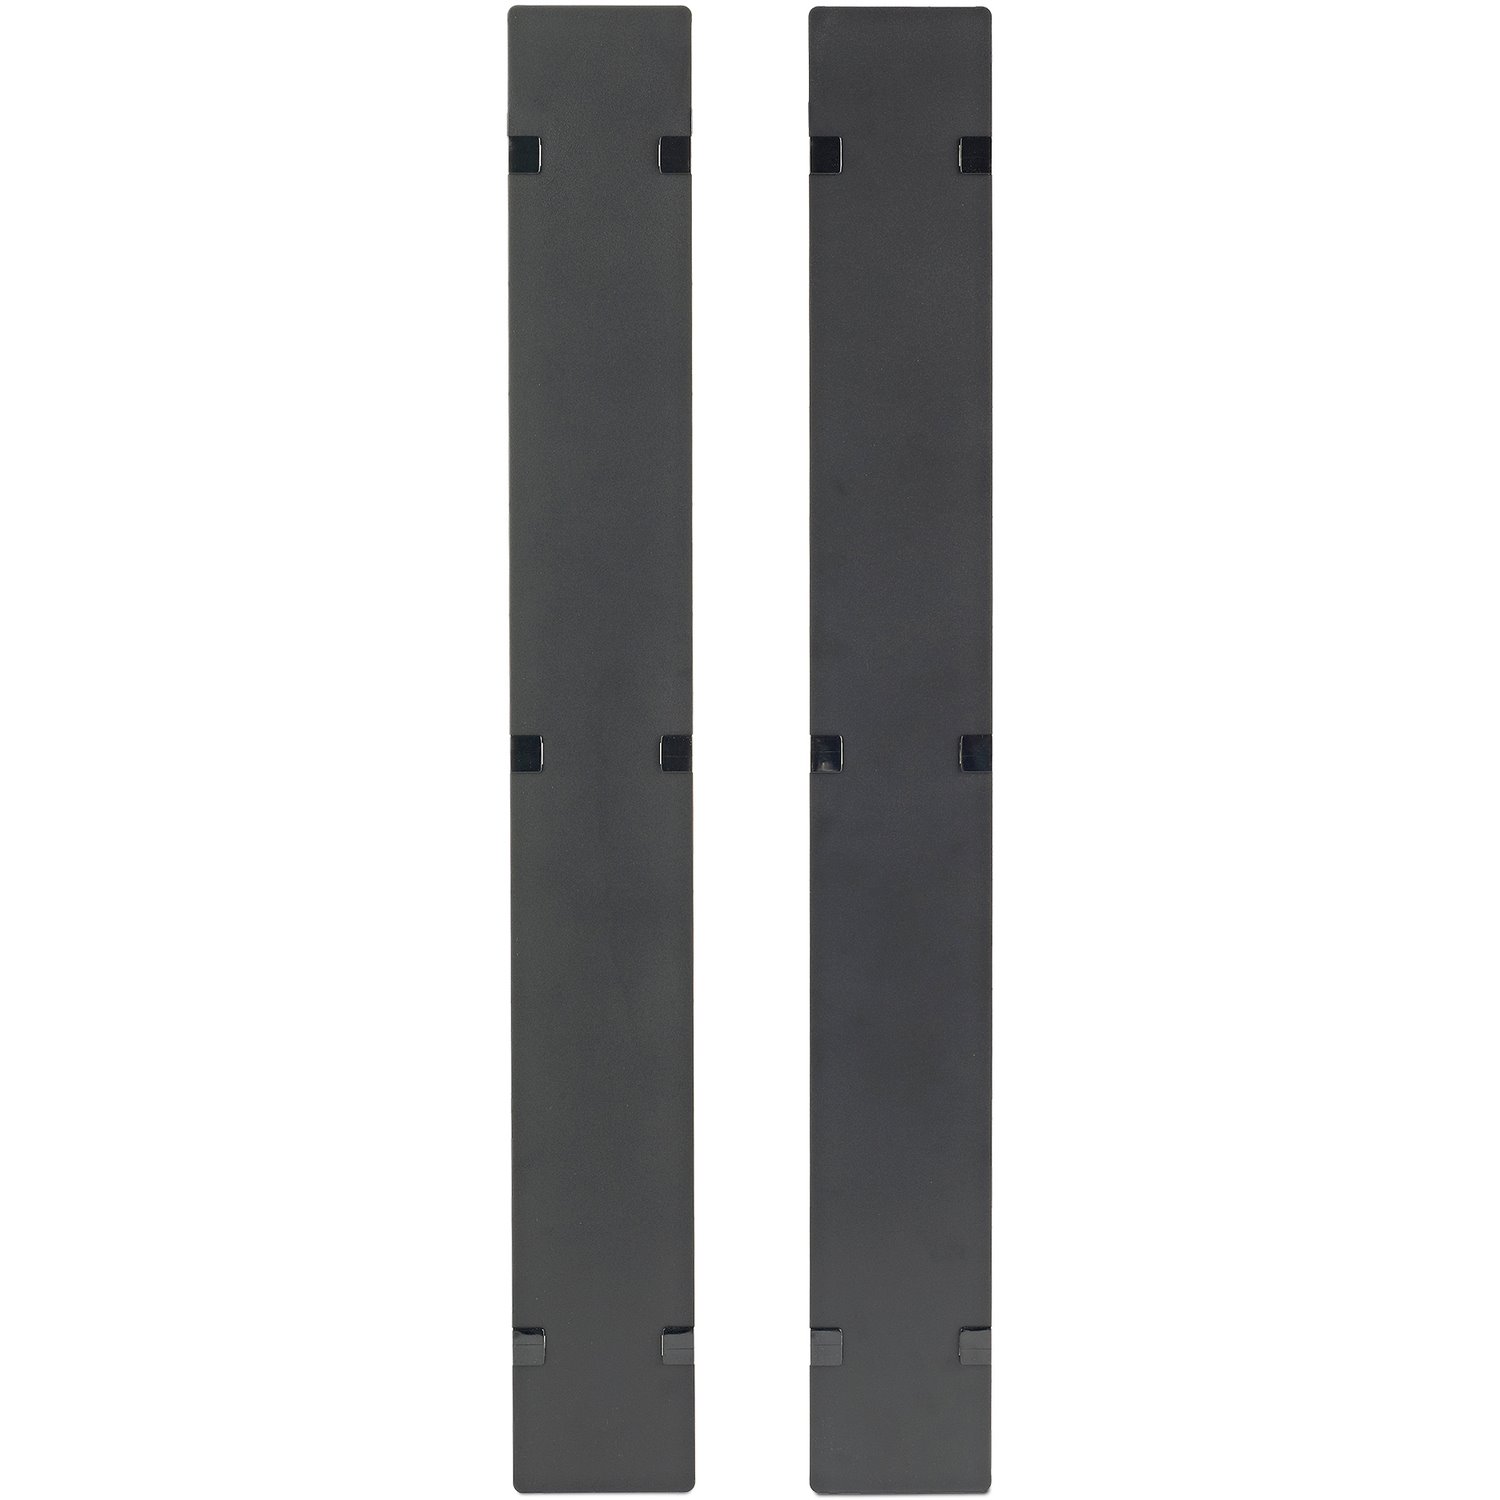 APC by Schneider Electric AR7586 Cable Organizer - Black - 2 Pack